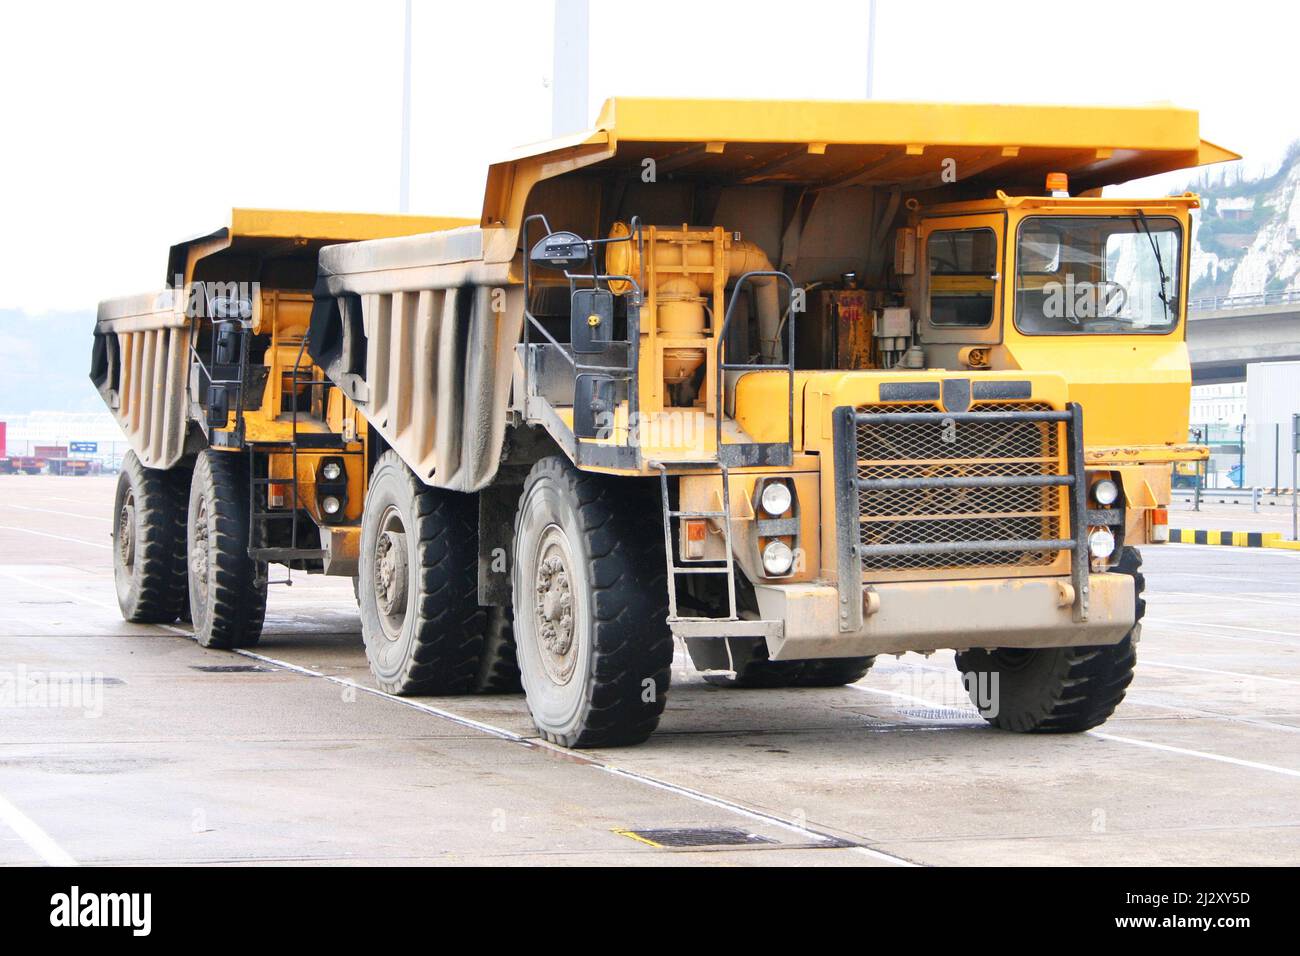 Quarry Trucks. Supersized haul trucks specifically engineered for use in quarries, mining and heavy-duty construction. Stock Photo